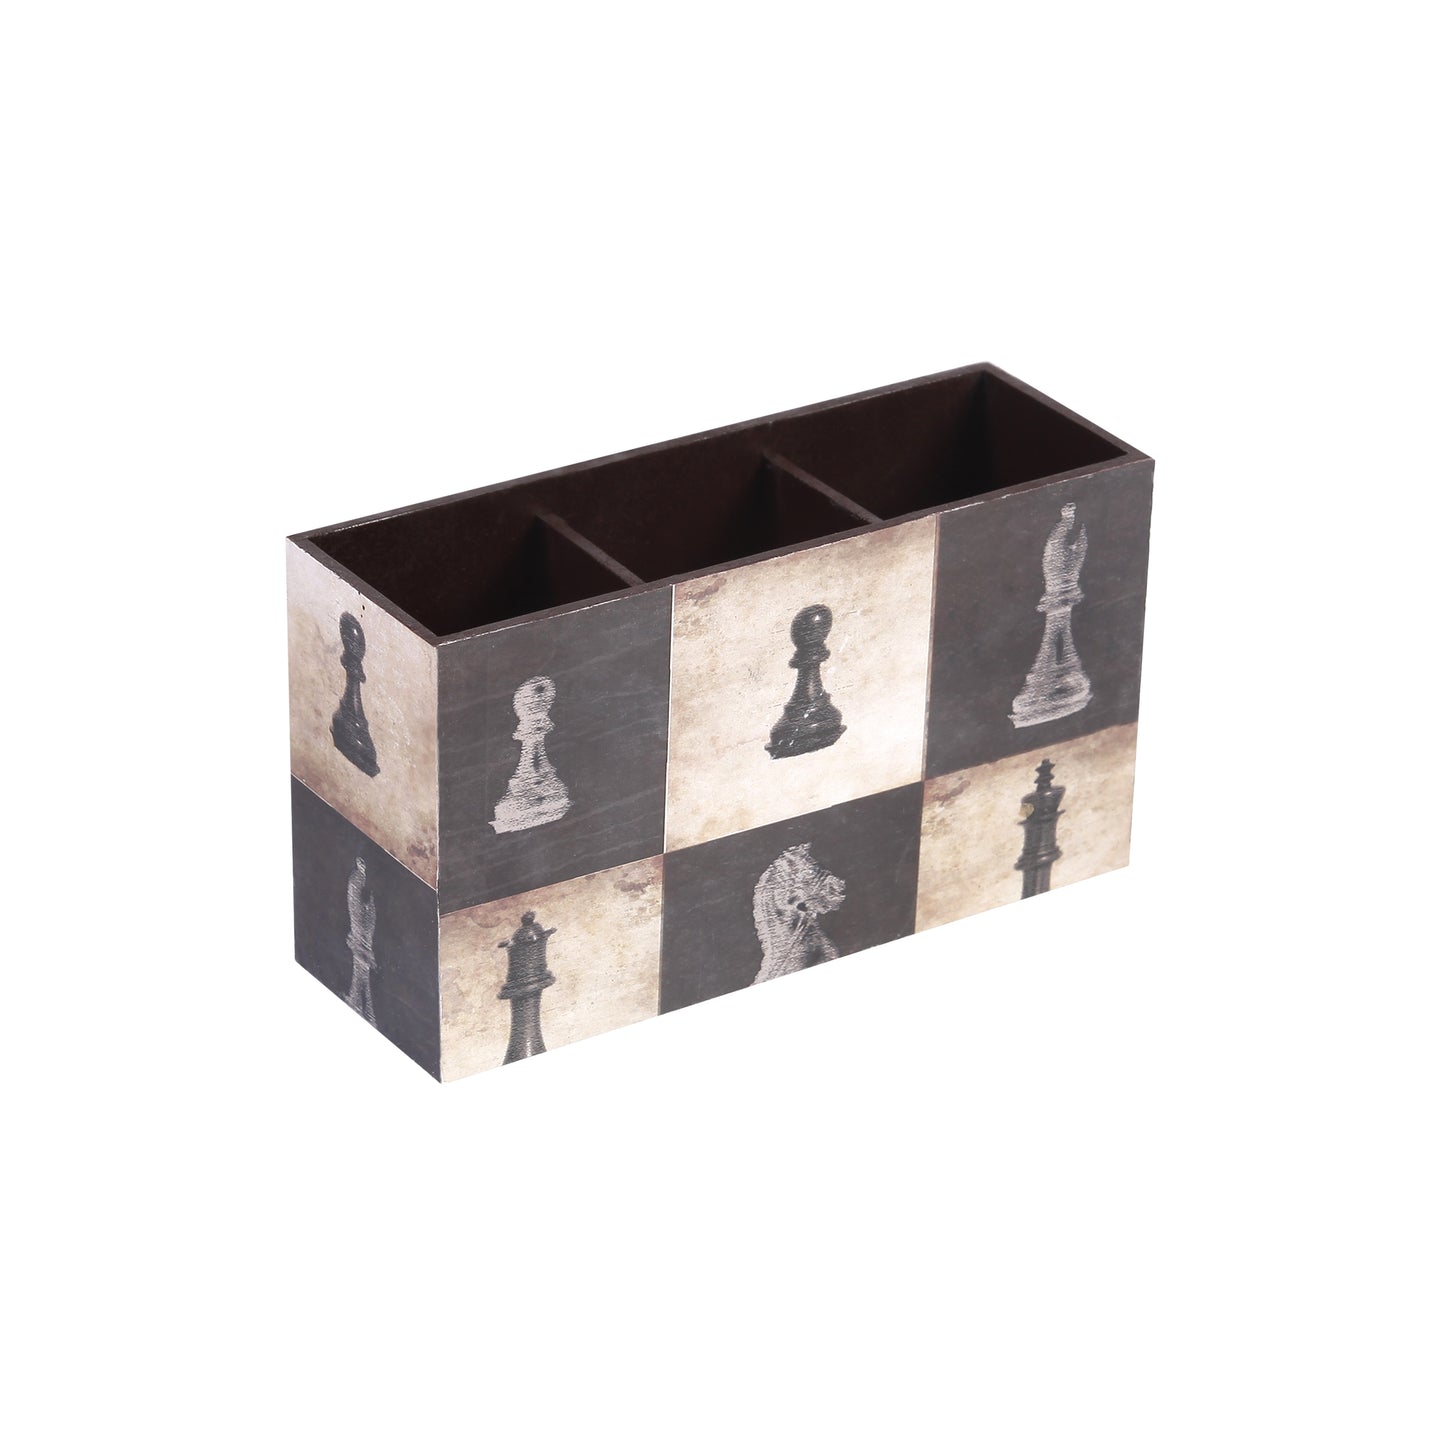 A Tiny Mistake Chess Wooden Cutlery Holder, 18 x 10 x 6.5 cm